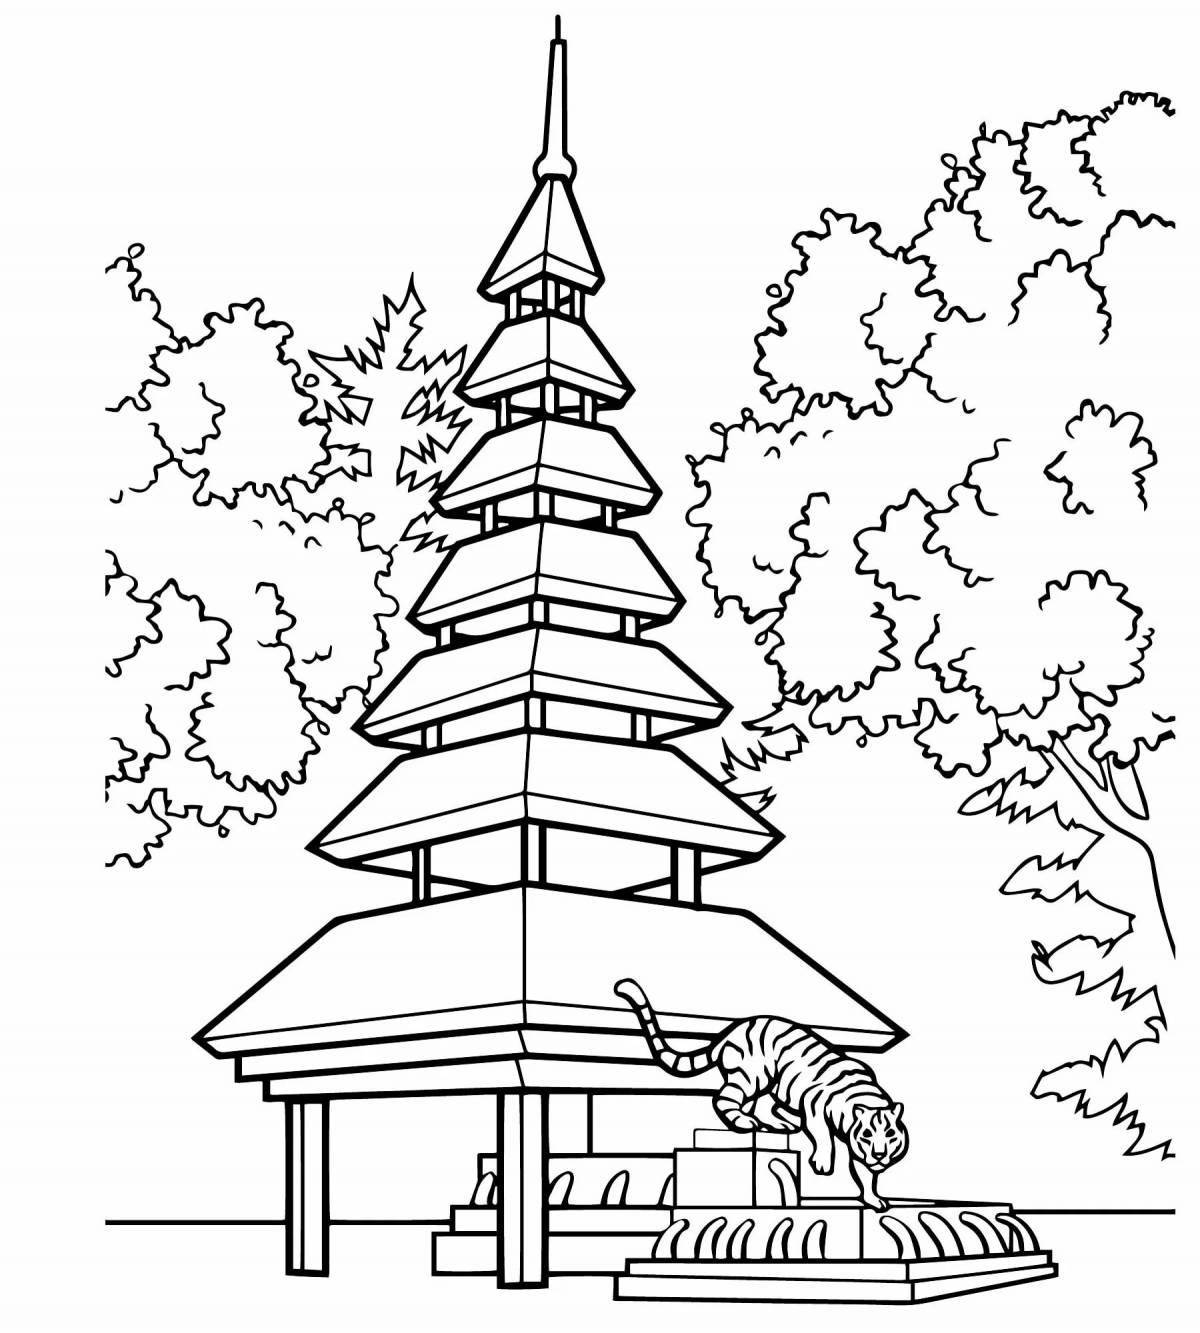 Rubber pagoda coloring page